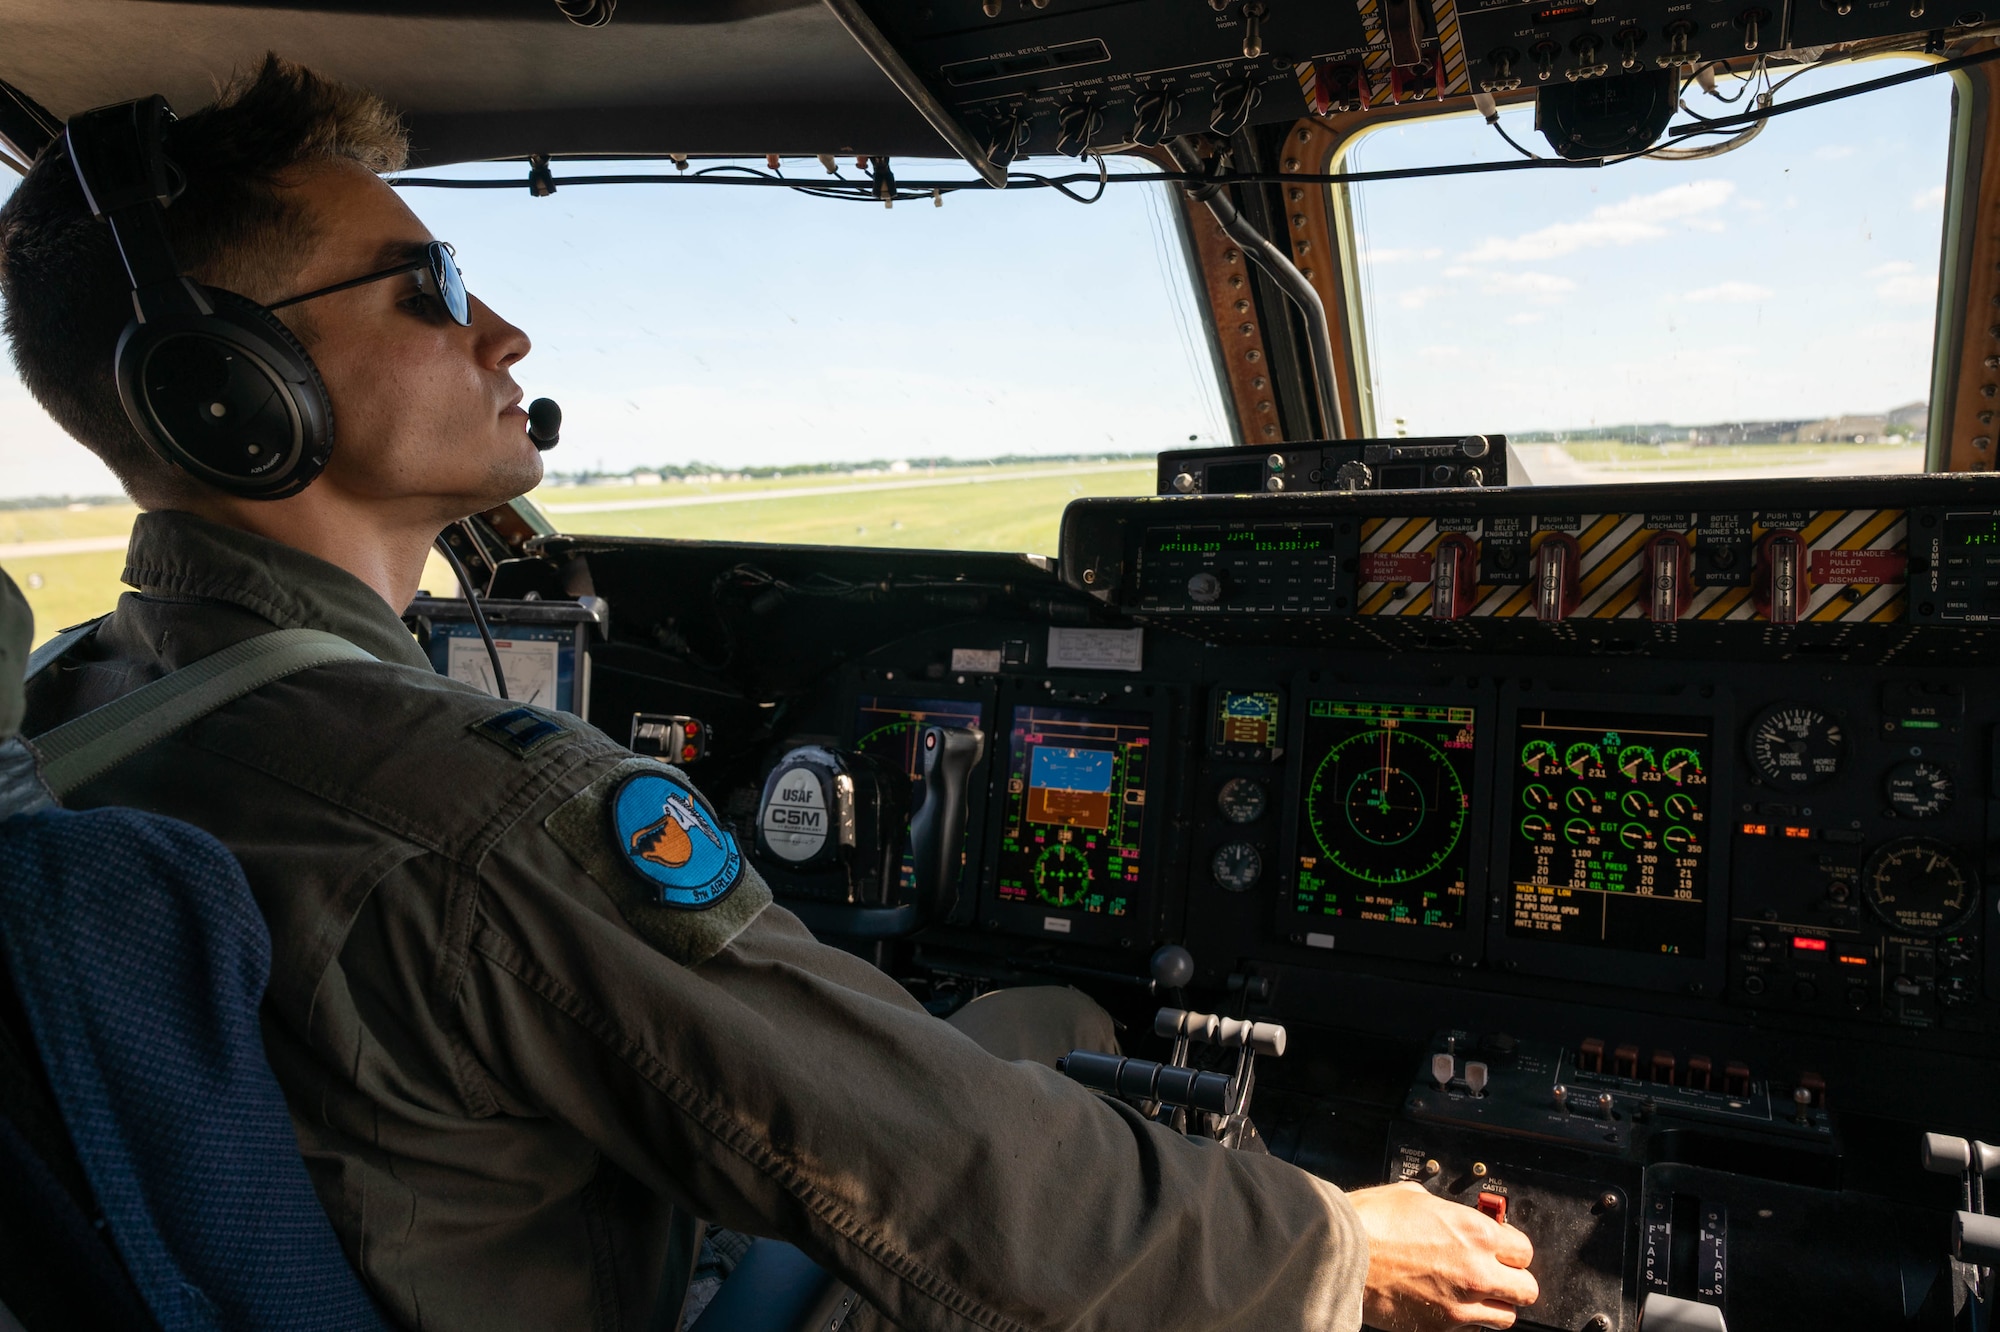 Capt. Jake Riley, 9th Airlift Squadron pilot, taxis a C-5M Super Galaxy after a local training flight at Dover Air Force Base, Delaware, June 23, 2021. The 9th AS routinely trains to provide global reach with unique outsized and oversized airlift capabilities on the C-5. (U.S. Air Force photo by Senior Airman Faith Schaefer)